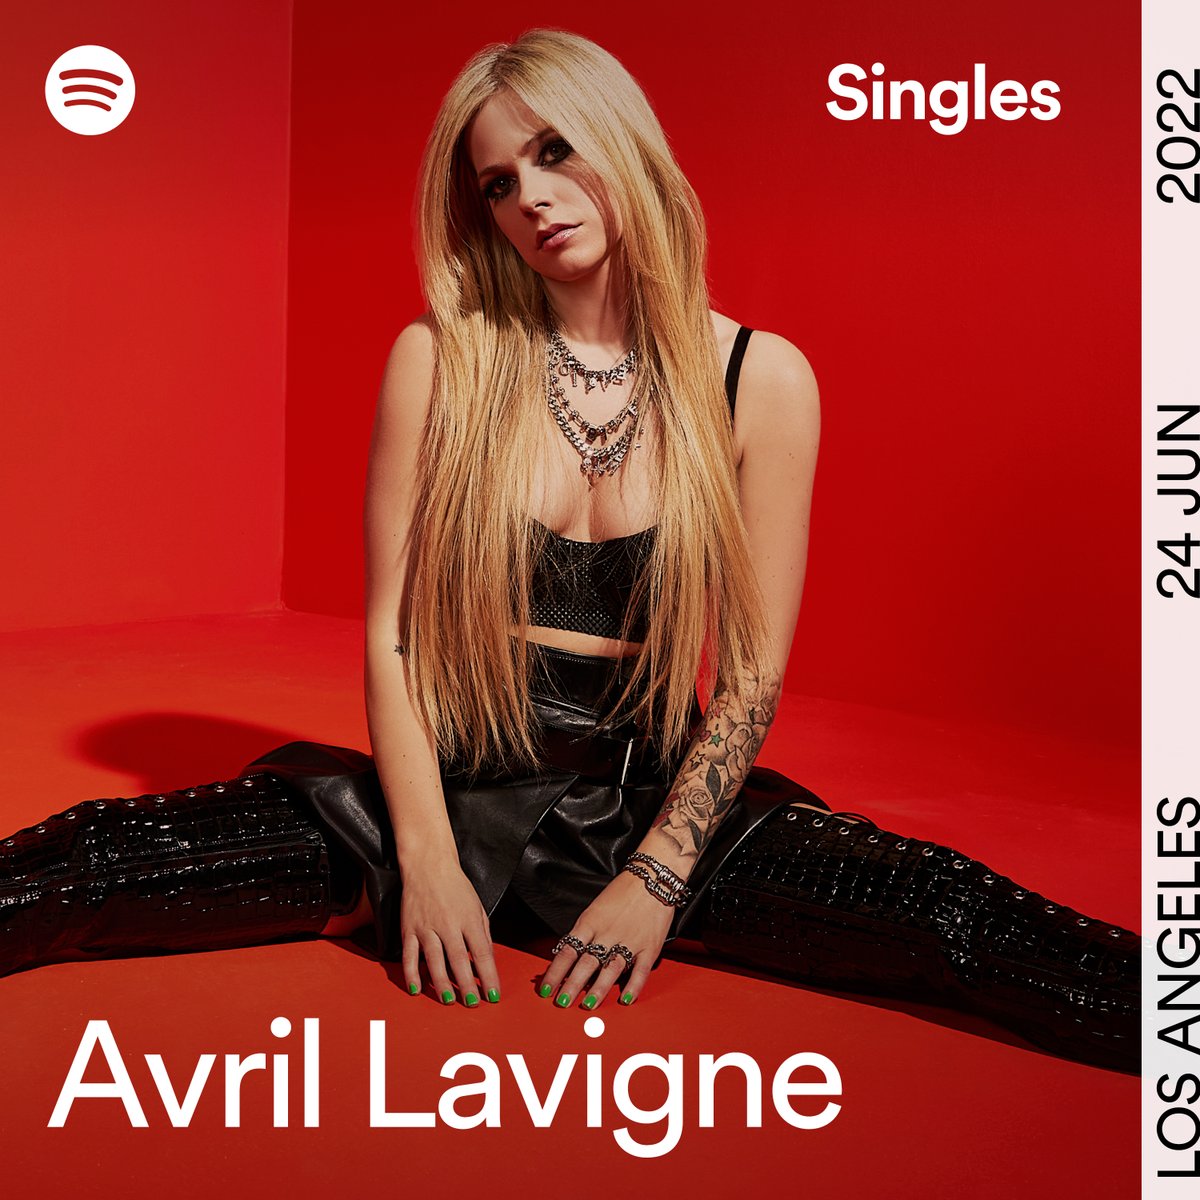 There’s nothing complicated about it, you have to listen to @AvrilLavigne’s #SpotifySingles now 🤘 spotify.link/avrilsingles